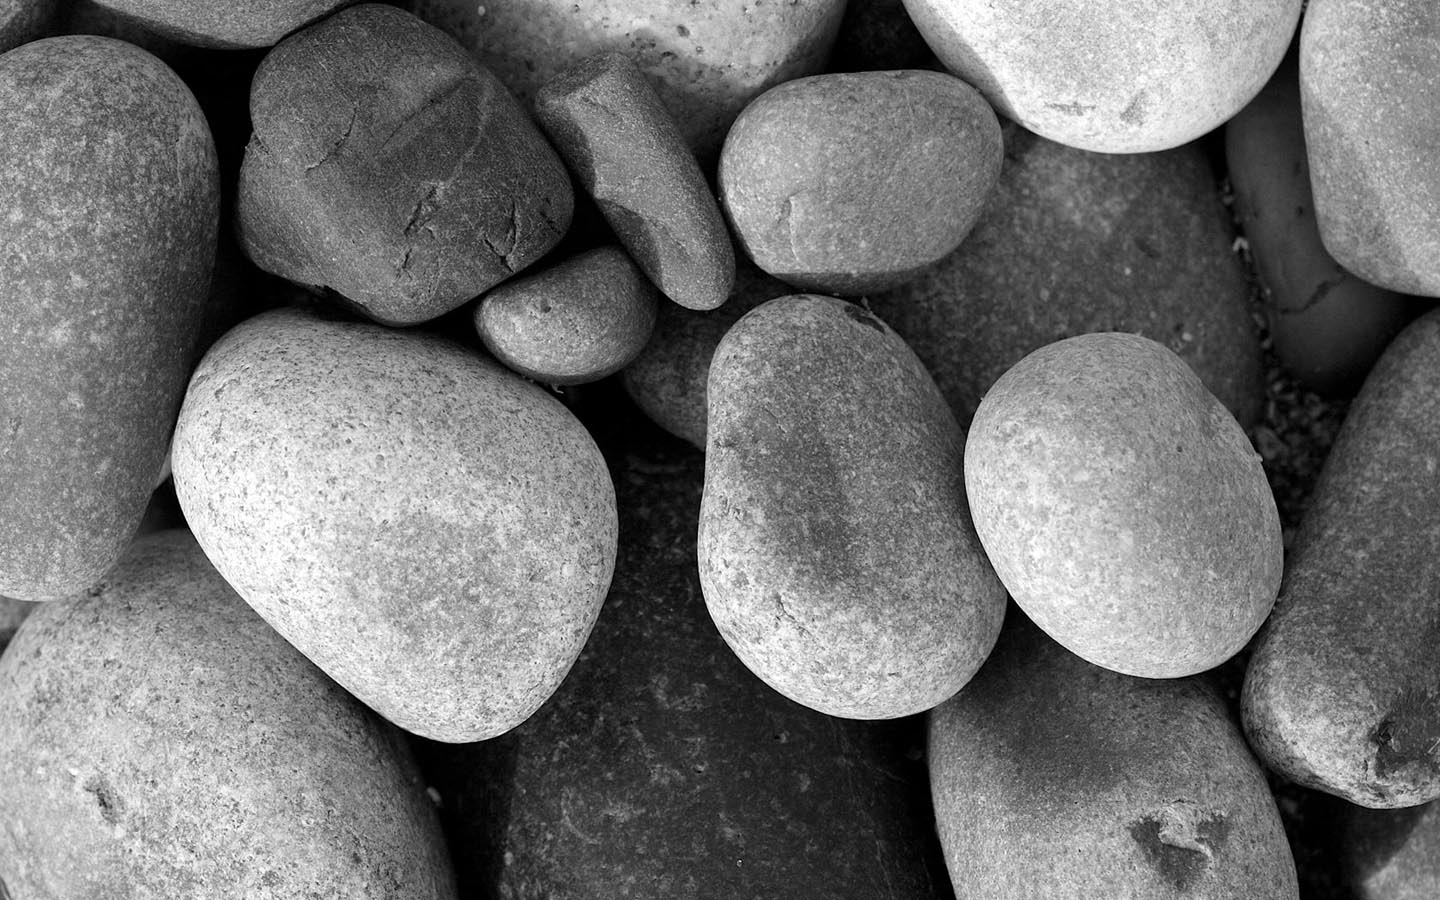 Black and White Wallpapers of Large Pebbles on a Beach.